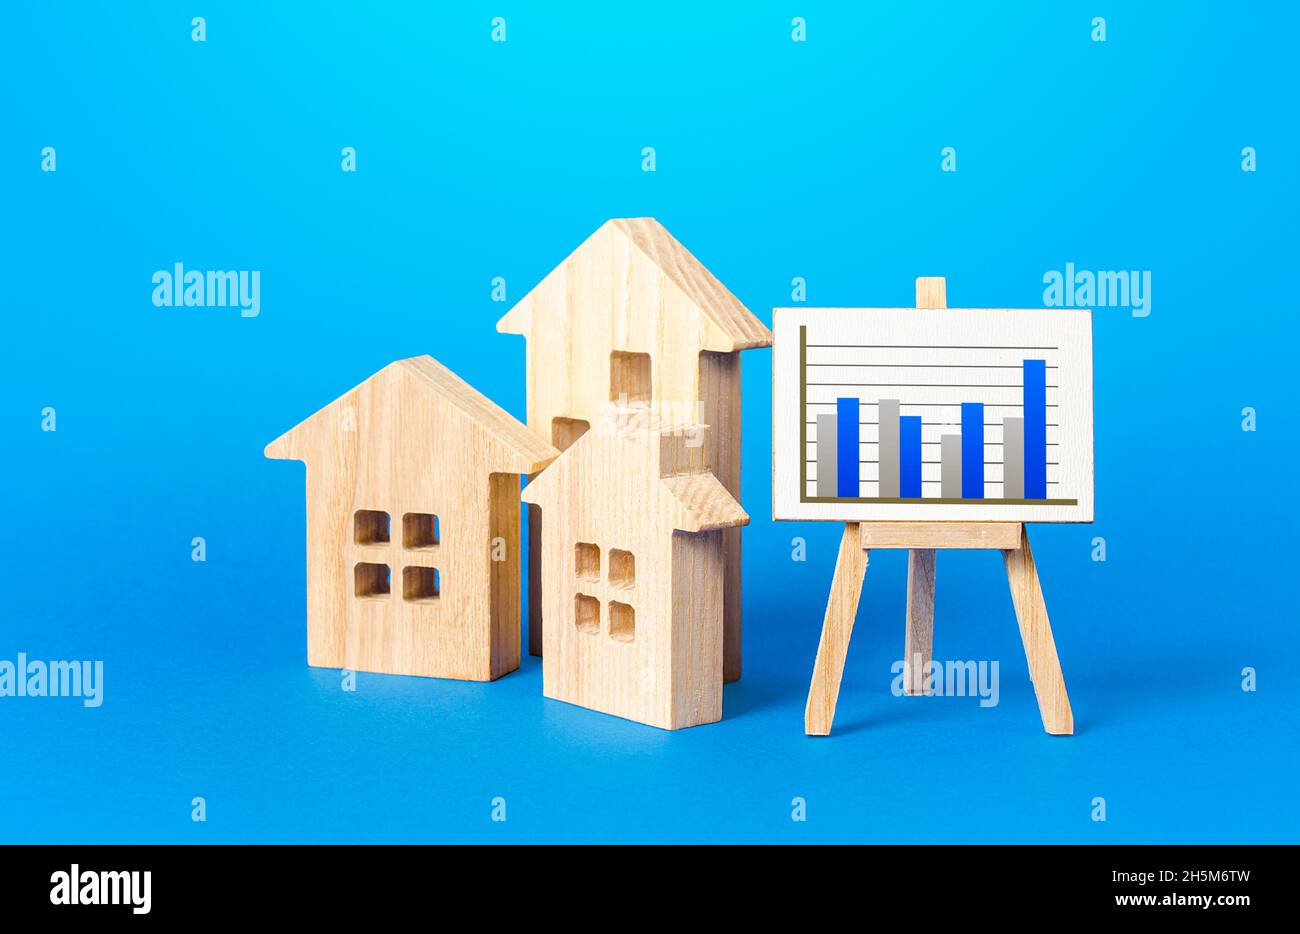 Houses and easel with growing chart. Real estate market recovery and growth. Increased interest, demand for housing. Investment climate. Economy and e Stock Photo